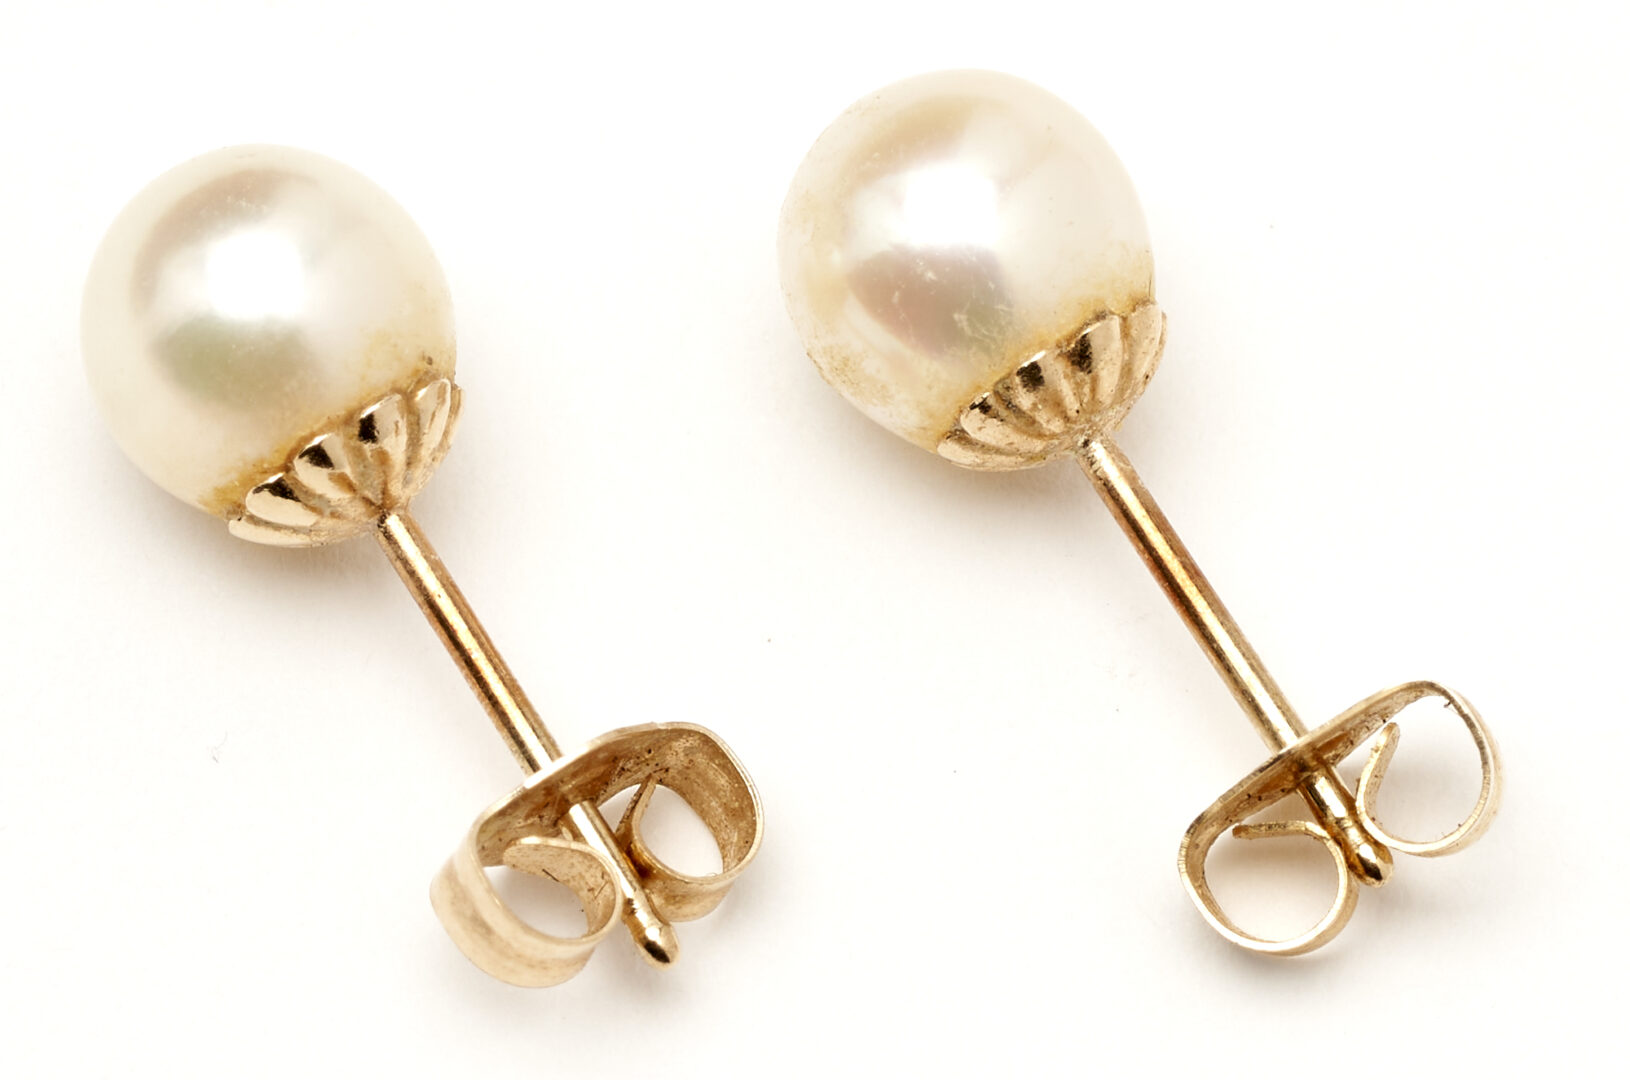 Lot 1057: 2 Pearl Necklaces, 1 Pair of Pearl Earrings & Judith Lieber Swarovski Lipstick Case